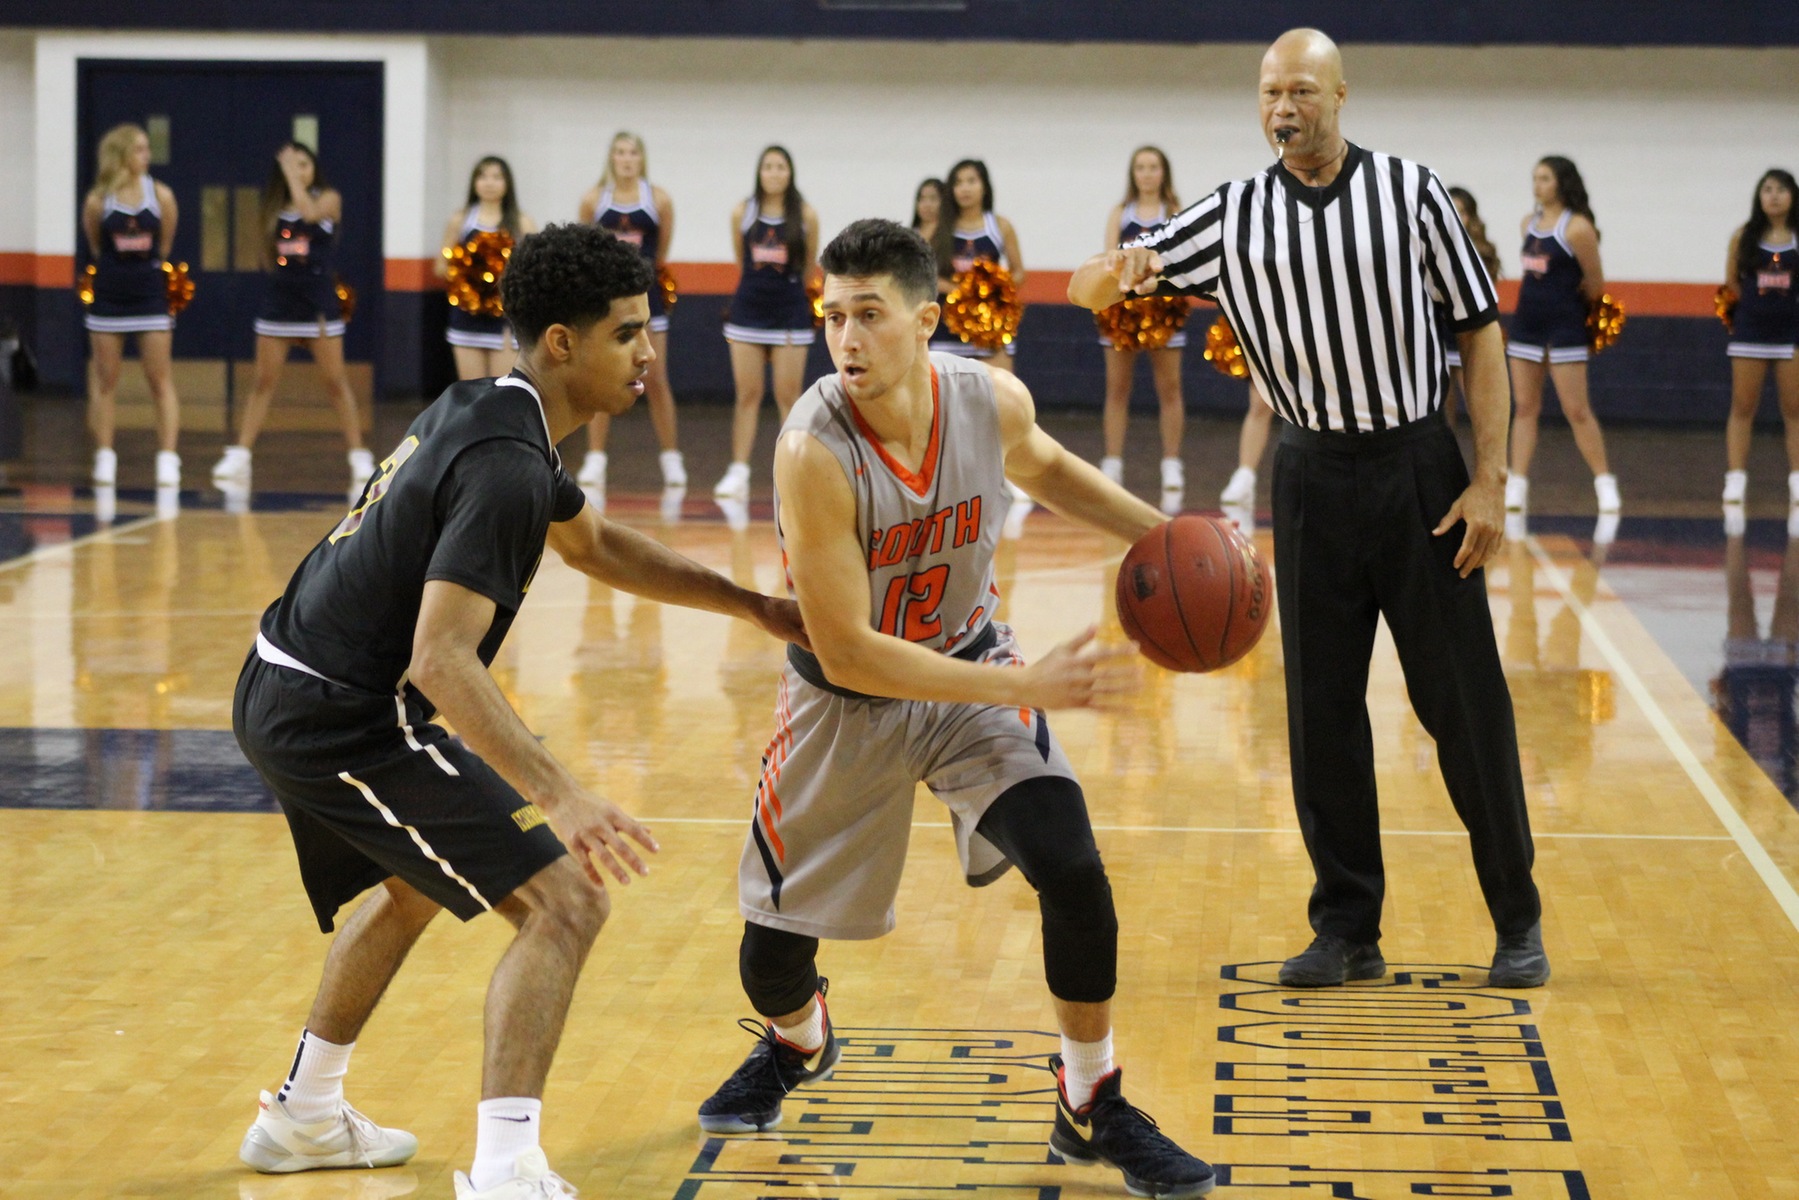 Third-ranked Texans travel to Midland on Wednesday for conference opener at 7:30 p.m.